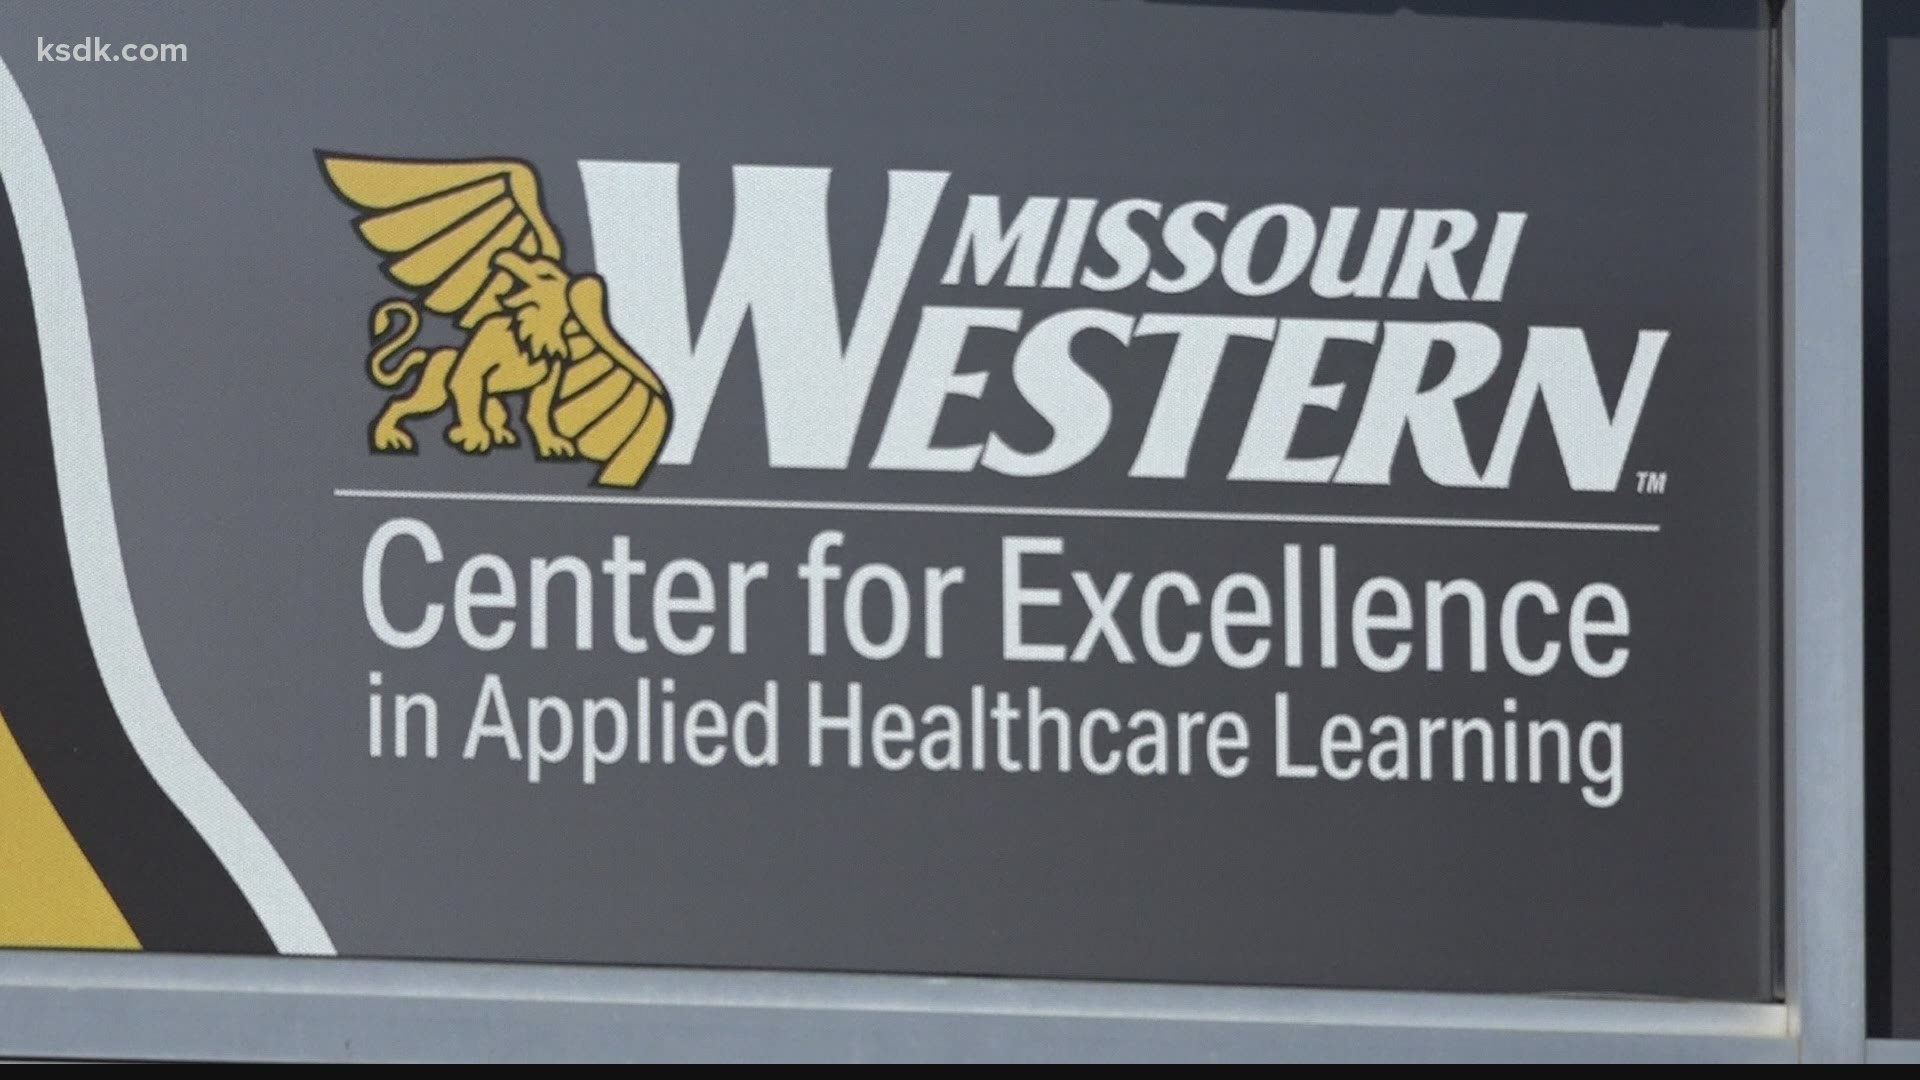 Parson attended a ribbon cutting event at Missouri Western State University in St. Joseph